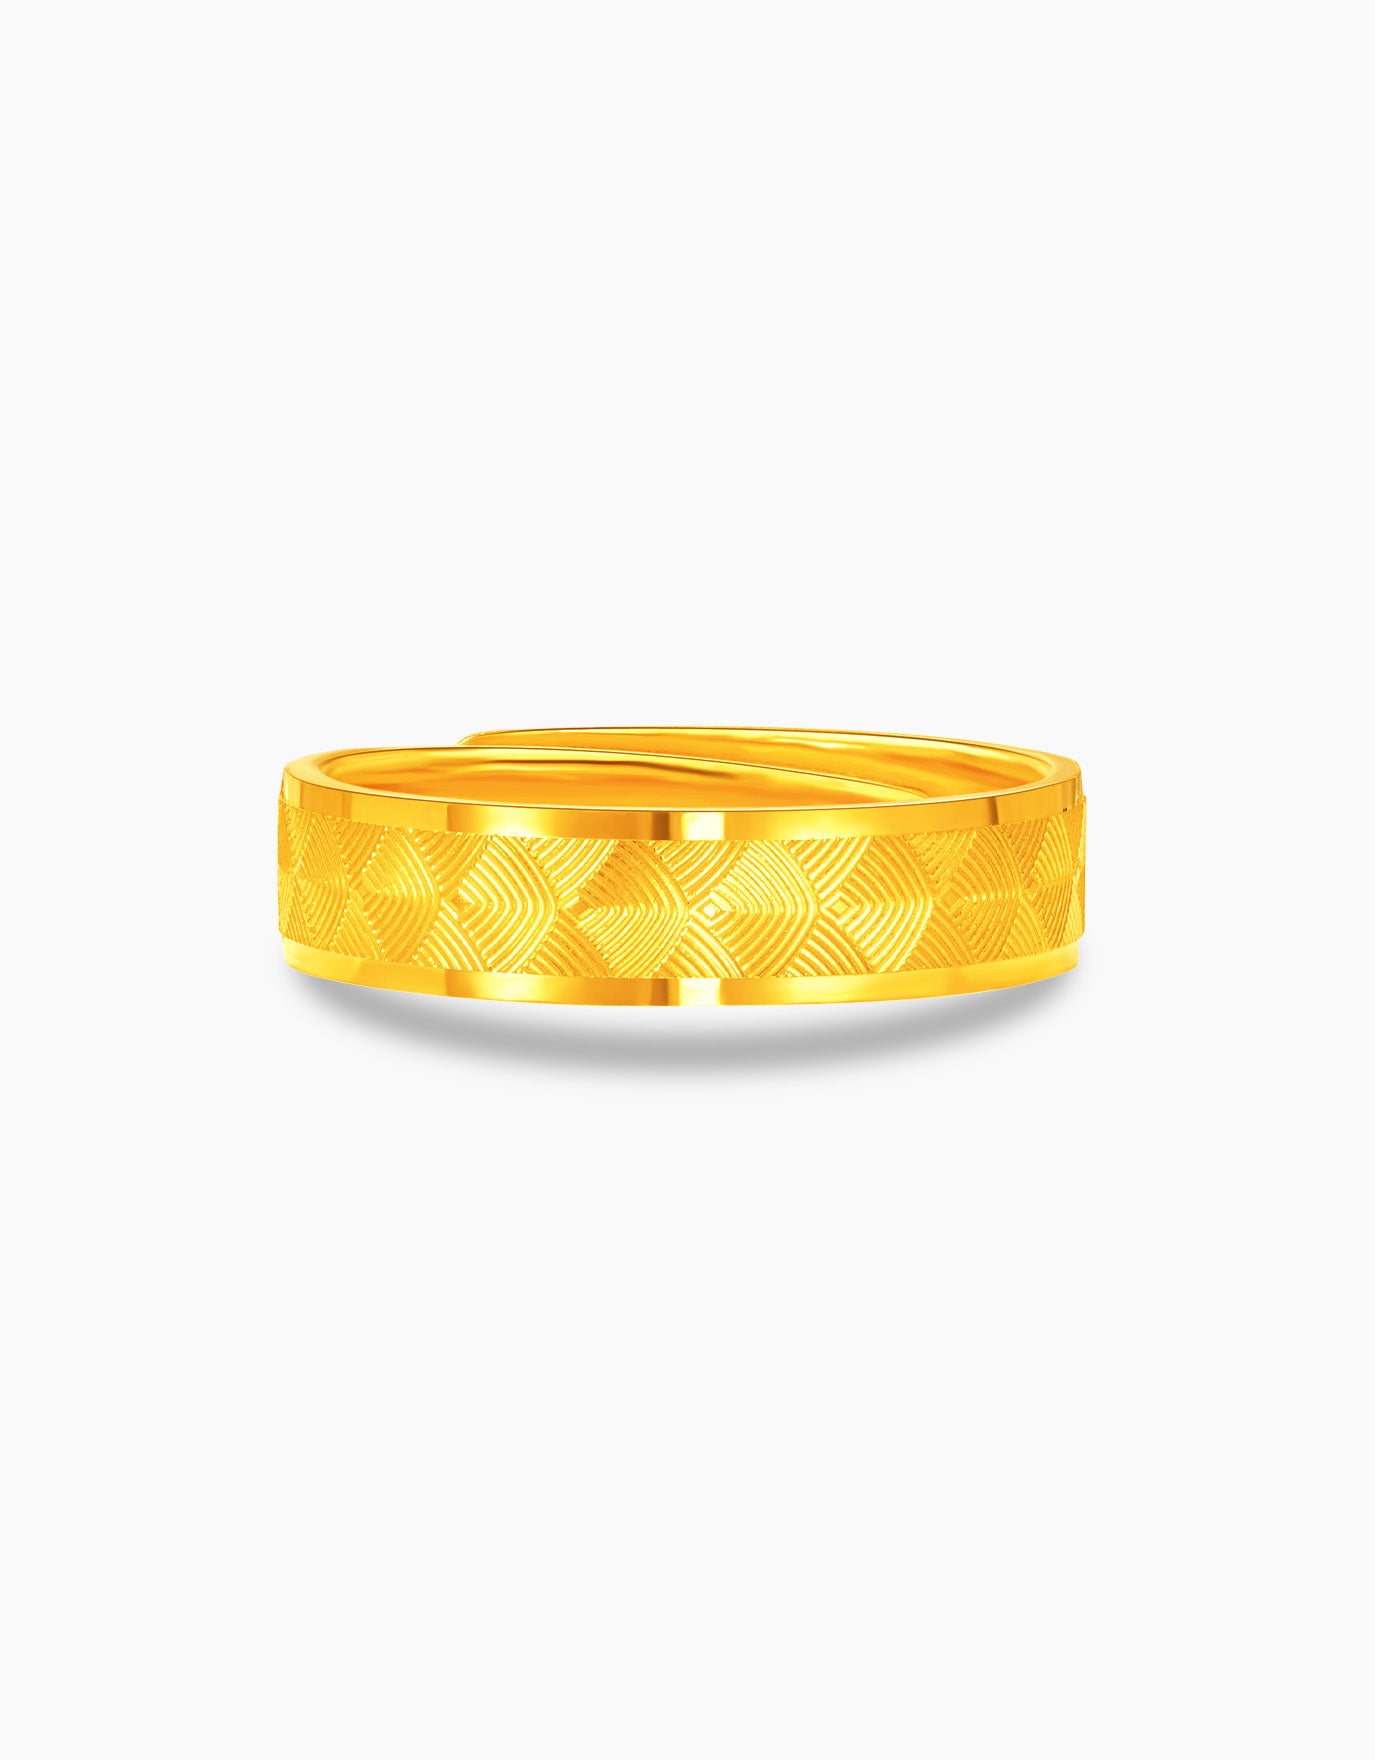 LVC 9IN Cecilion 999 Gold Ring